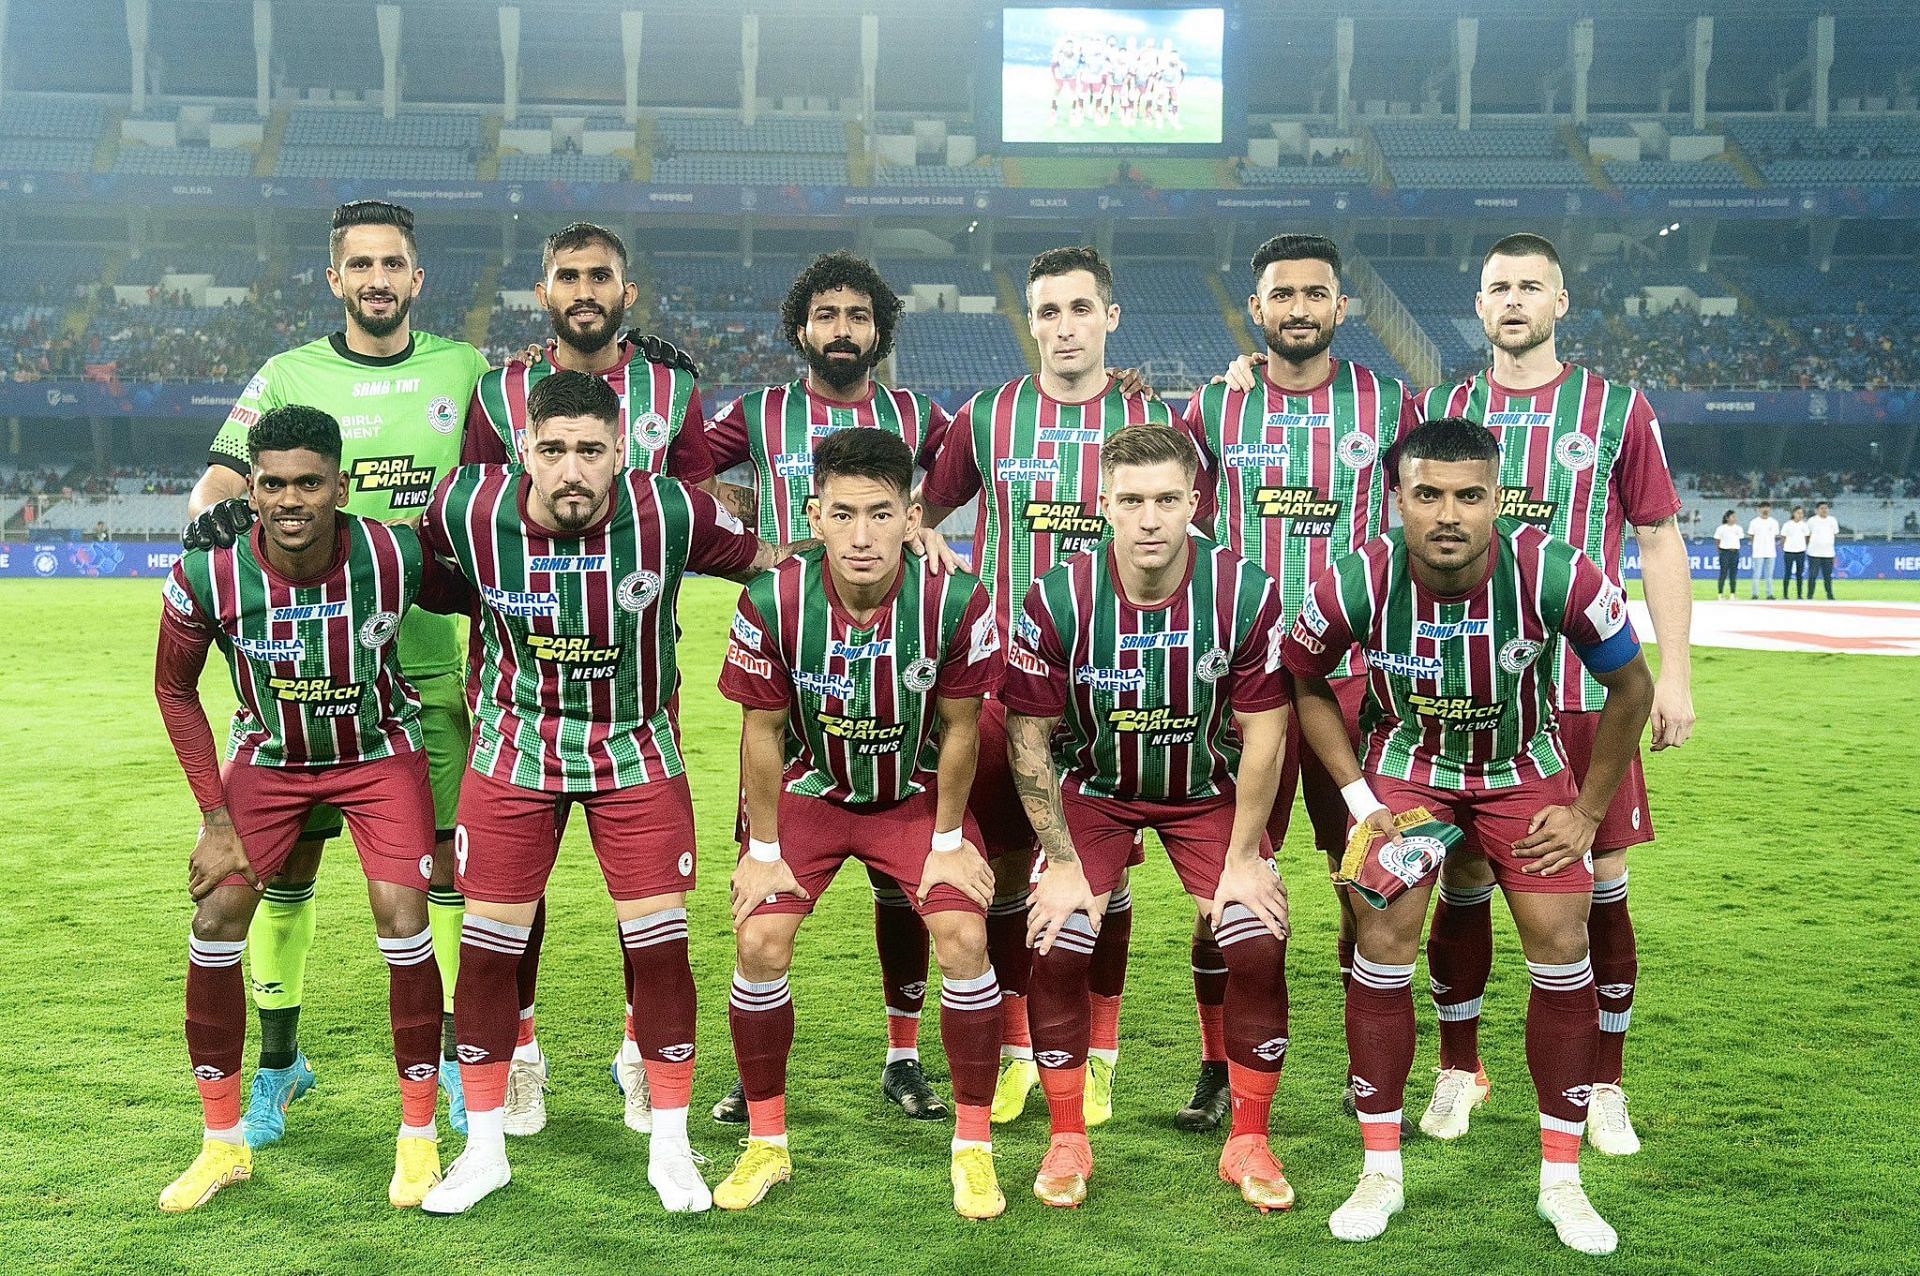 ATK Mohun Bagan would be favourites going into the Kolkata Derby.